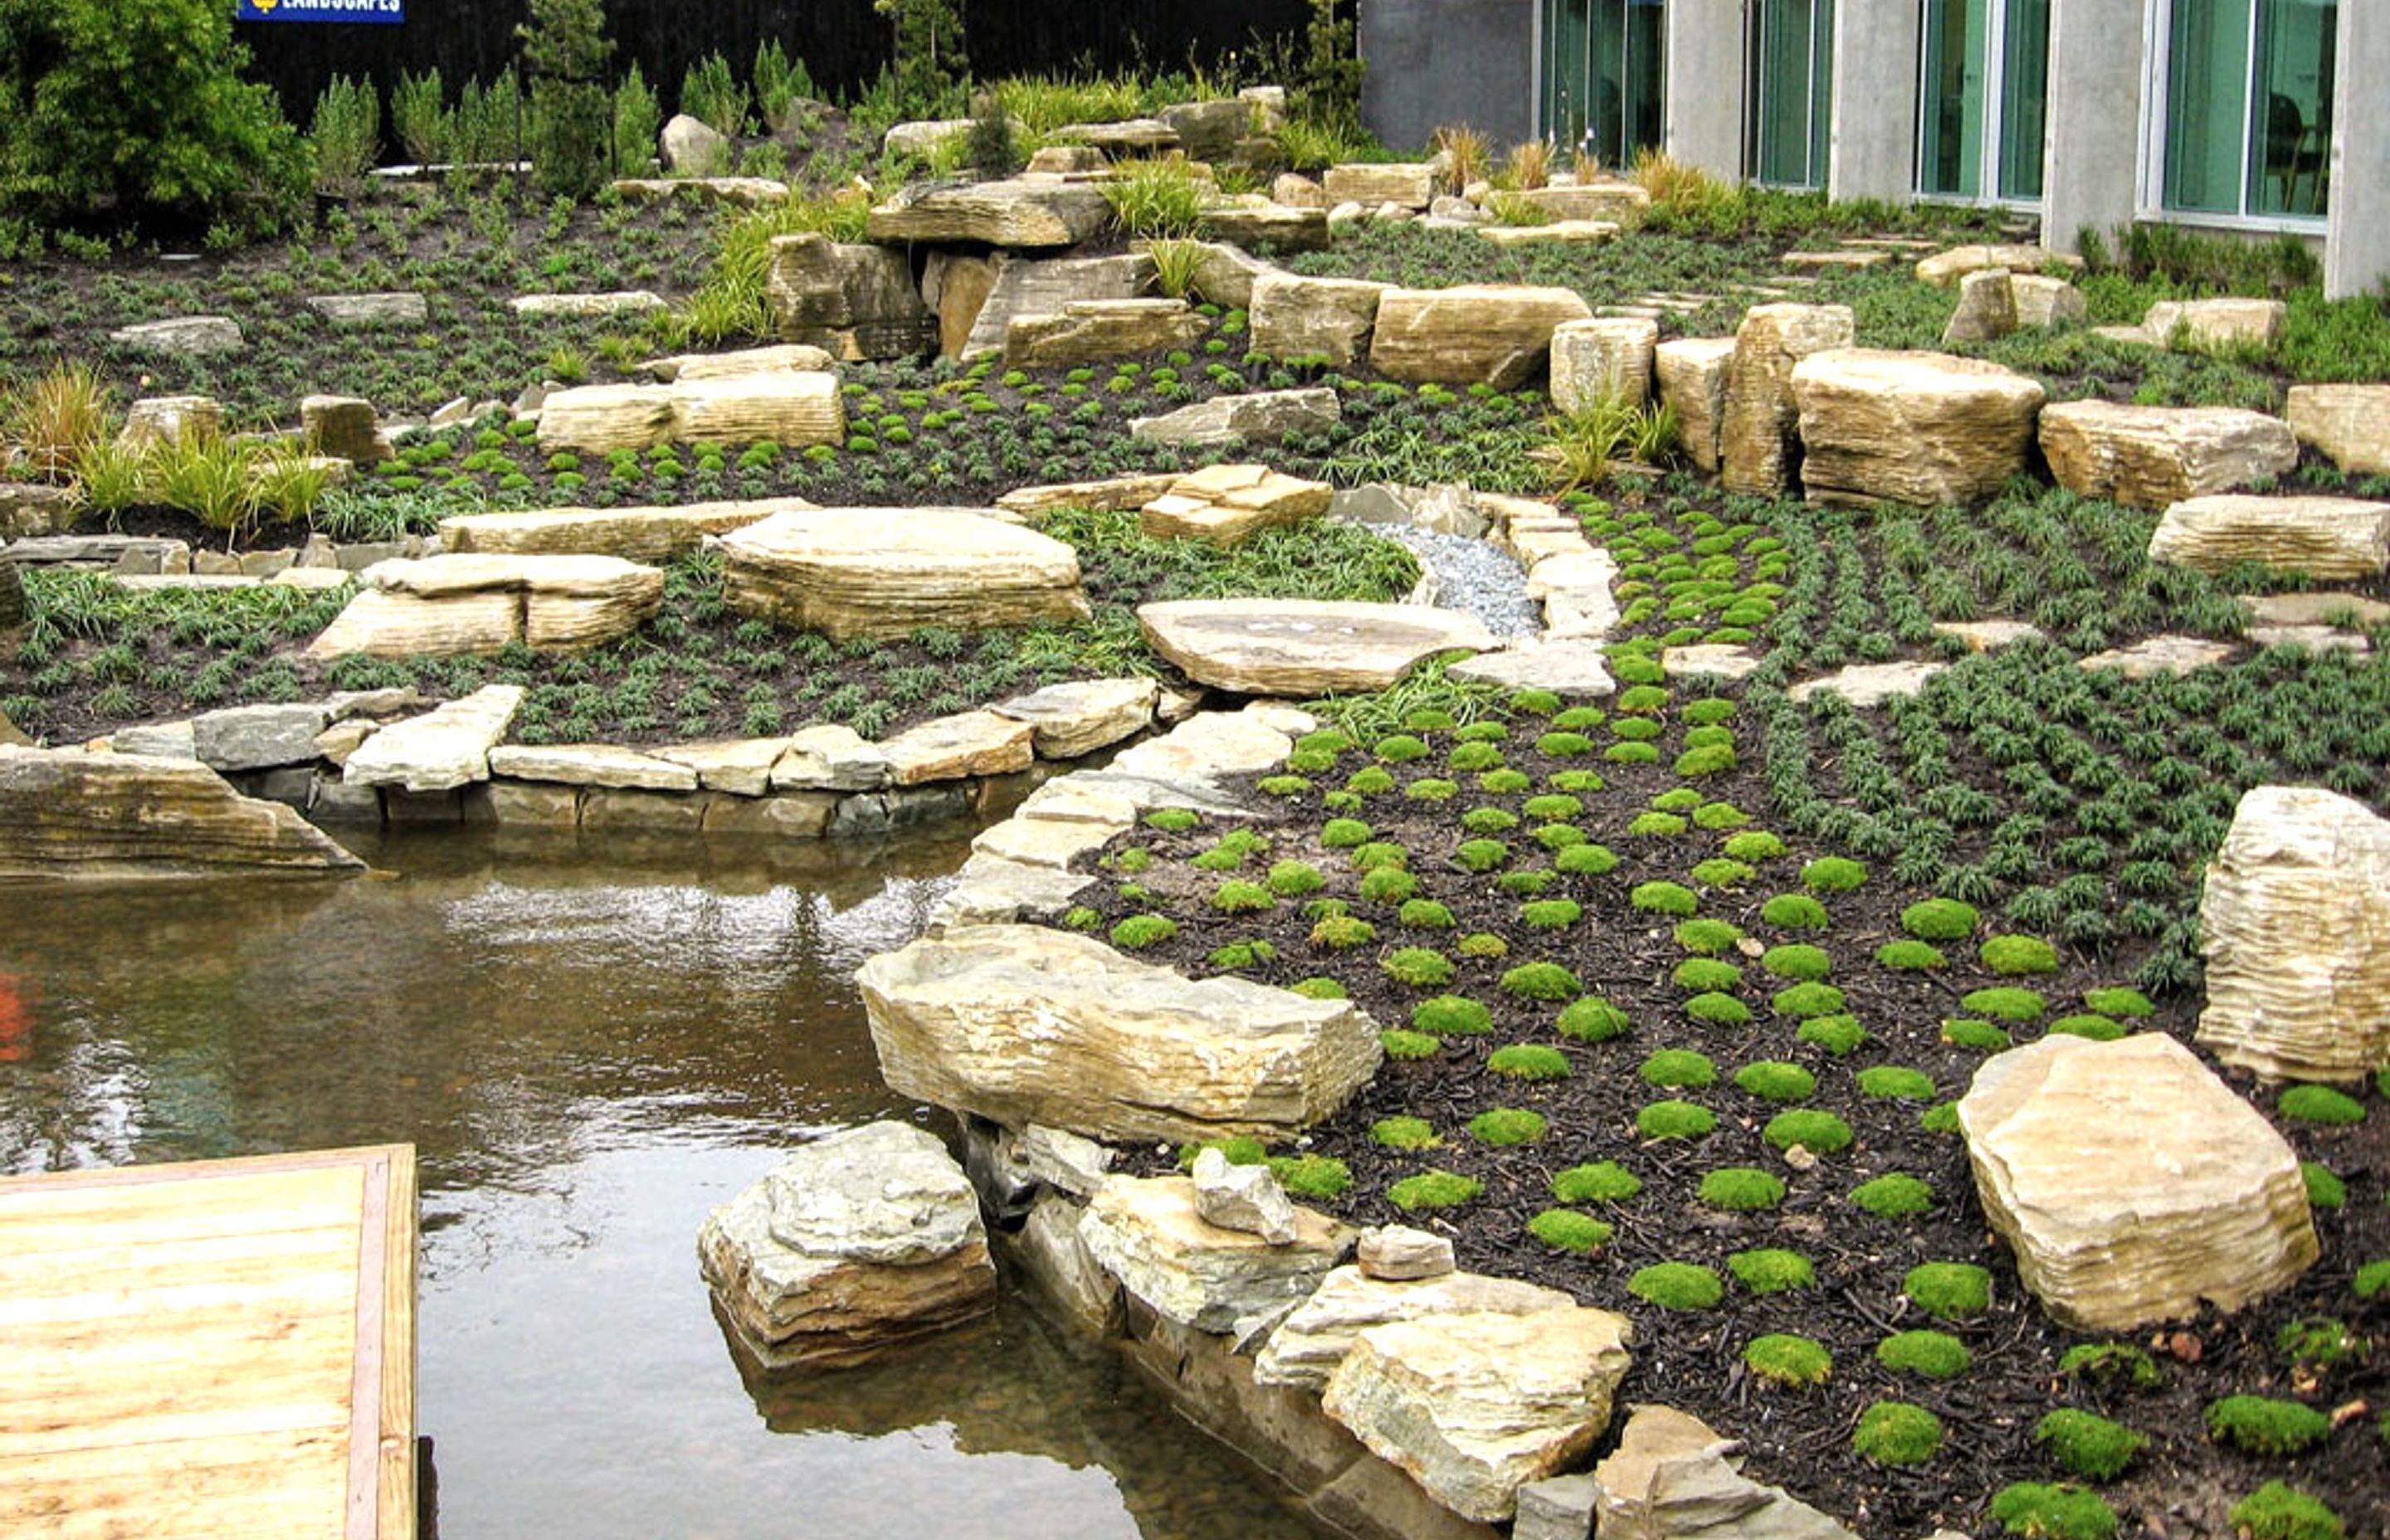 Large natural flagstones have been used throughout this landscape to both define and accentuate various areas of planting. Flagstones have also been used as stepping stones for pathways.